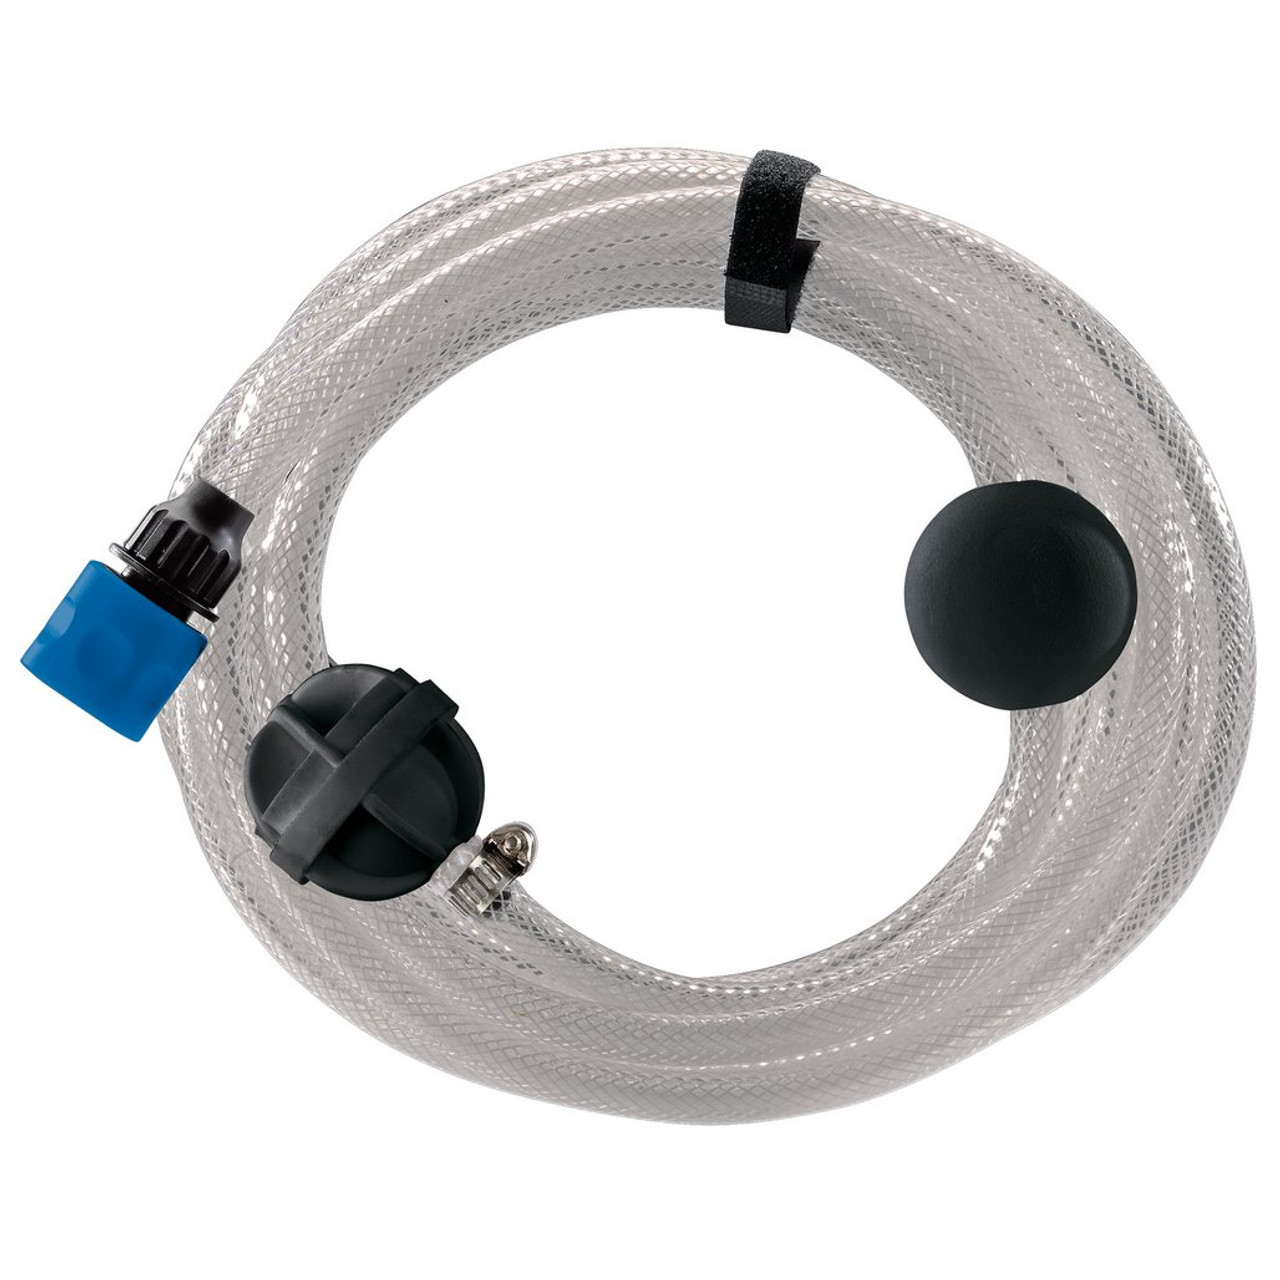 Supplied with 6m self-priming hose